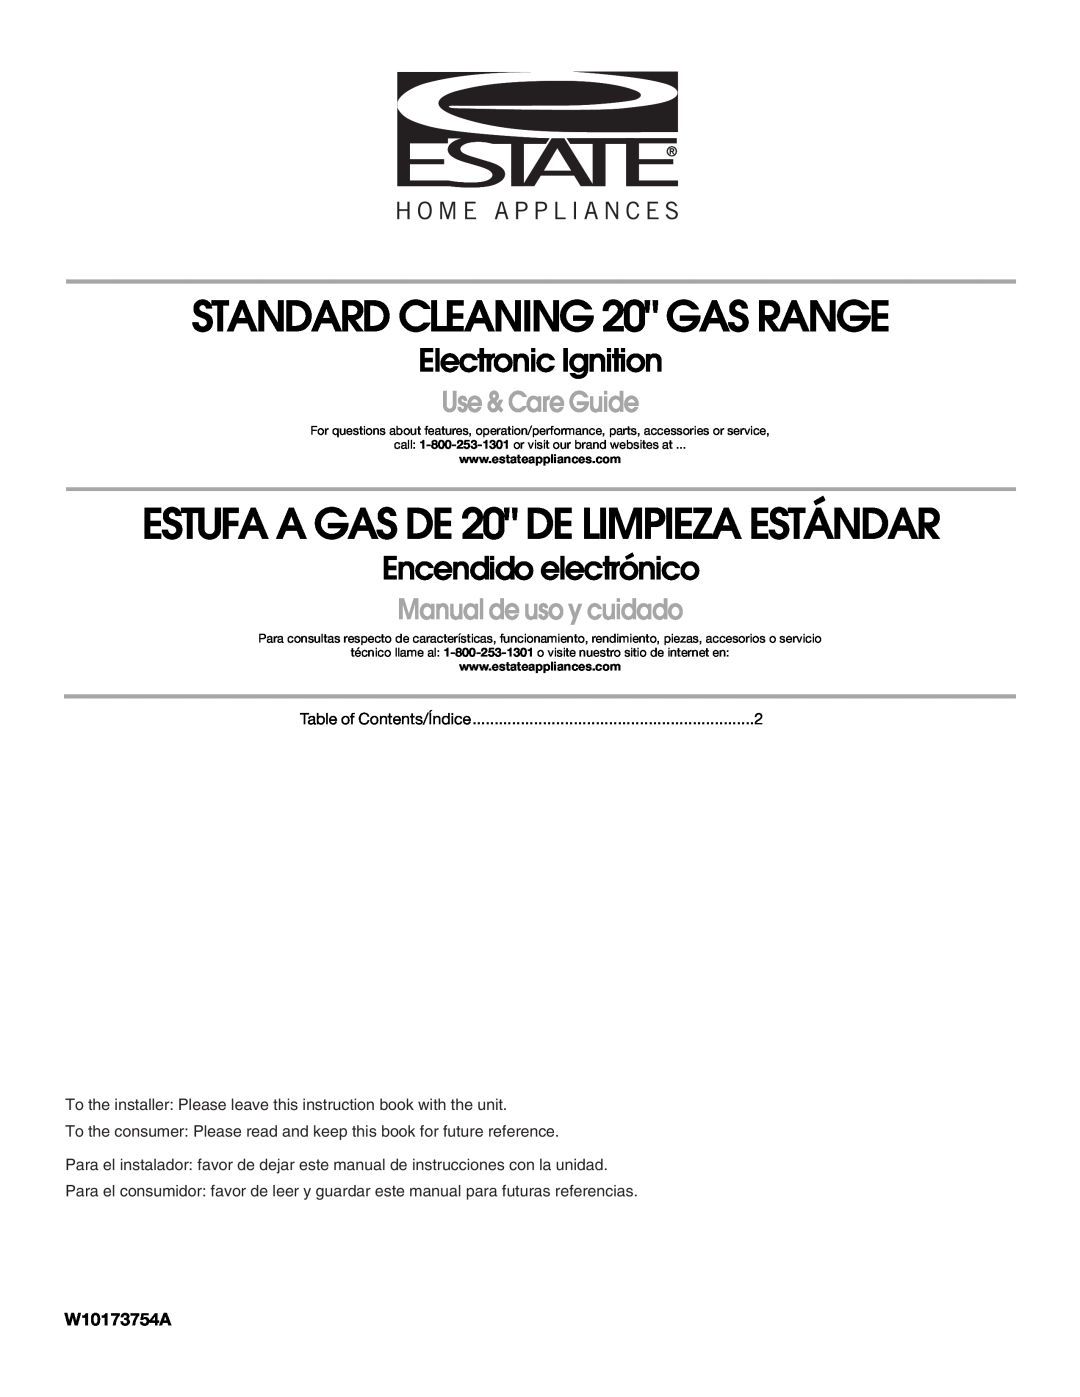 Estate W10173754A manual Electronic Ignition, Encendido electrónico, STANDARD CLEANING 20 GAS RANGE, Use & Care Guide 